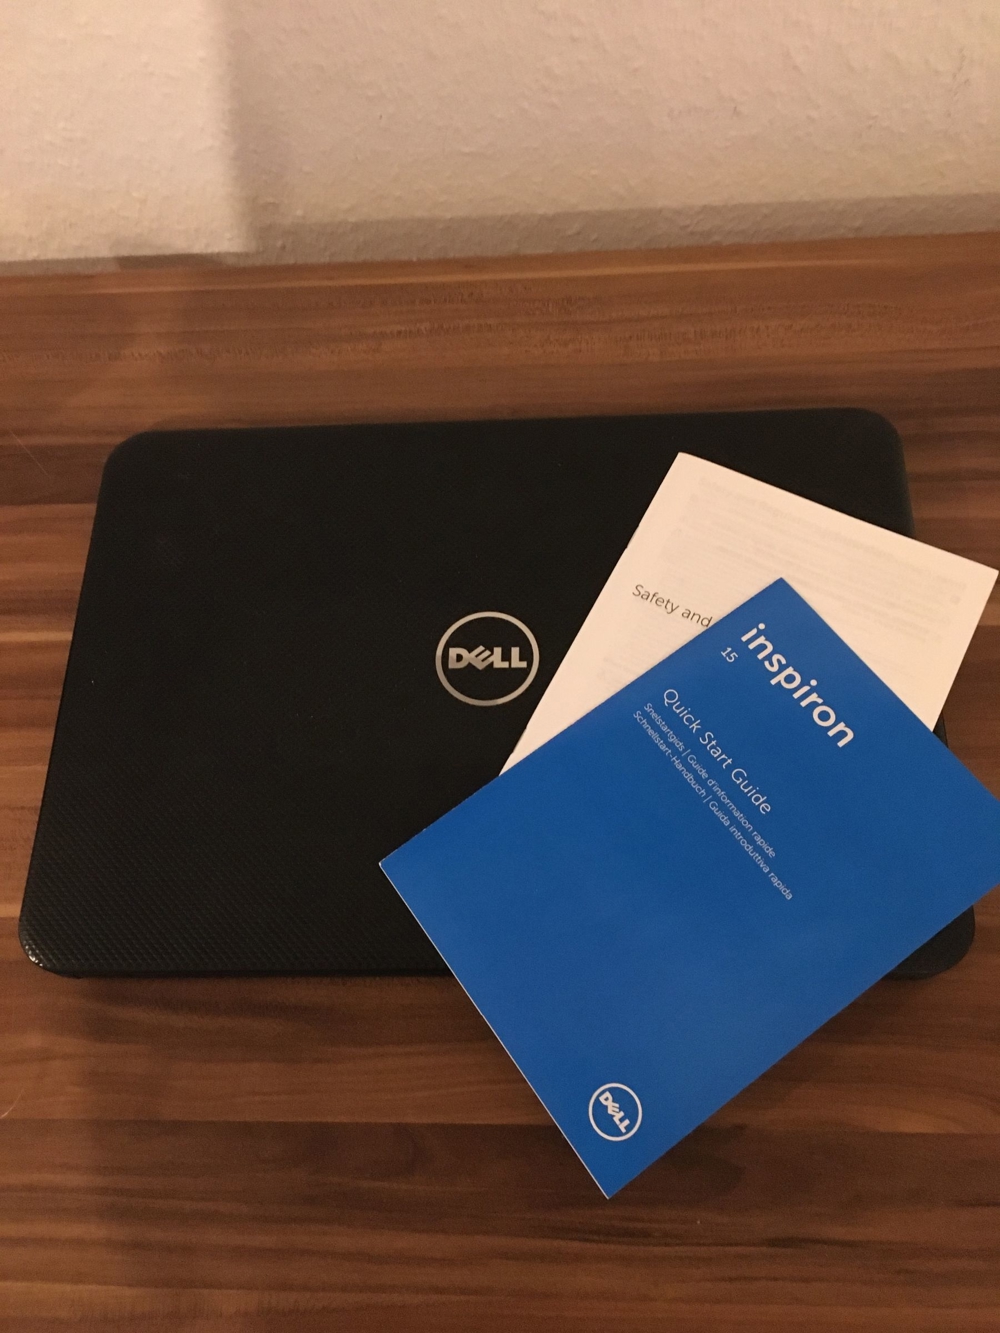 "DELL" Business NOTEBOOK, Modell: "INSPIRON 15"